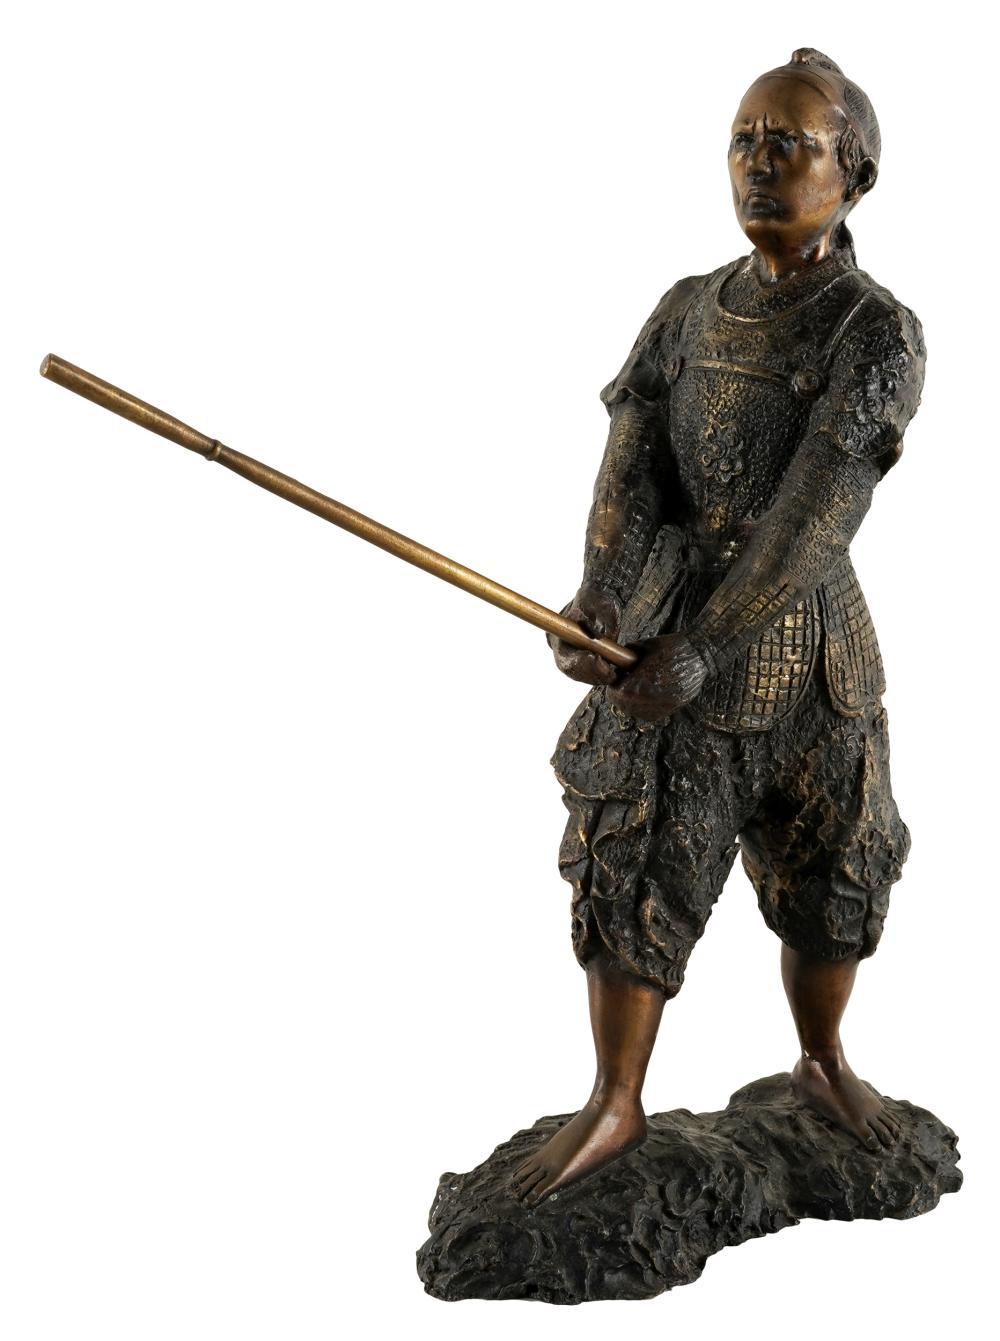 Late 20th Century Bronze sculpture of a Japanese Samurai warrior depicted holding a removable staff. Lost wax casting. Patinated bronze.